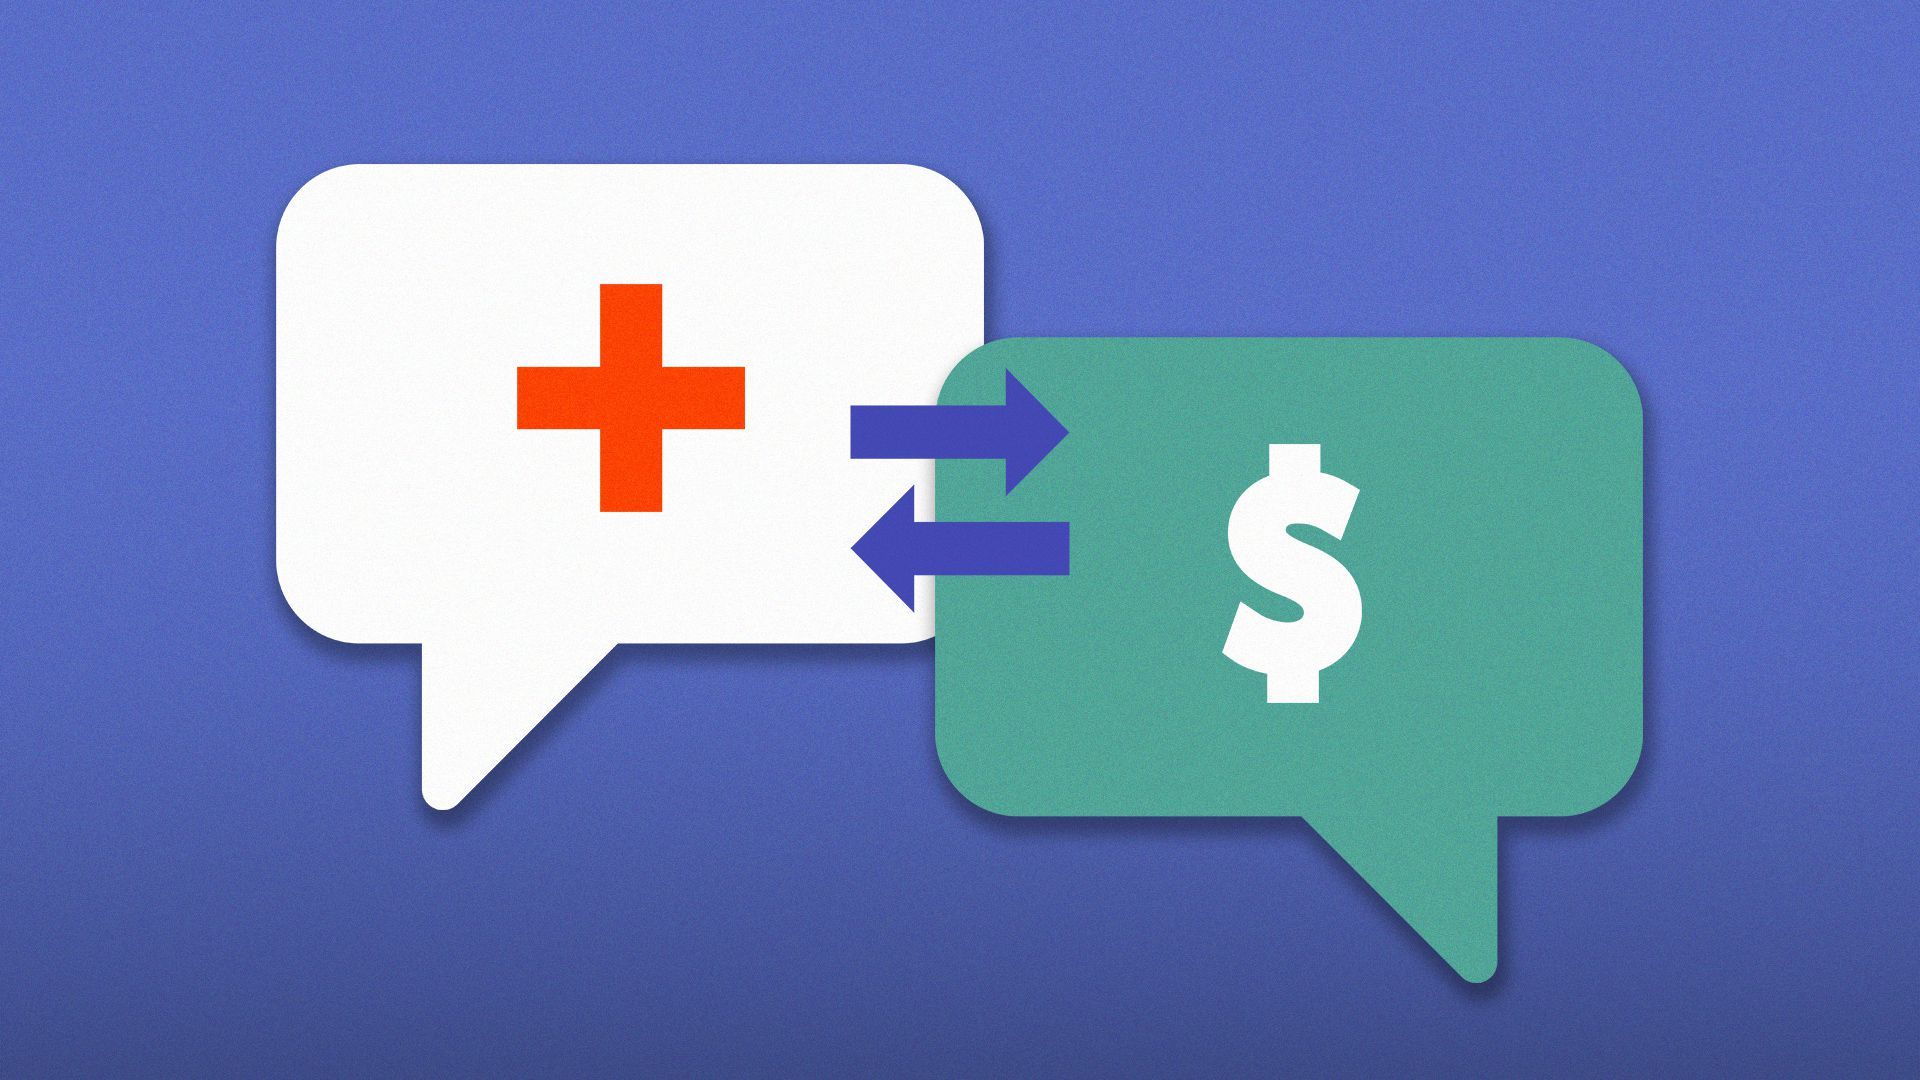 Illustration of two speech bubbles, one with a red cross and the other with a dollar sign, and a "translation" symbol in the middle.